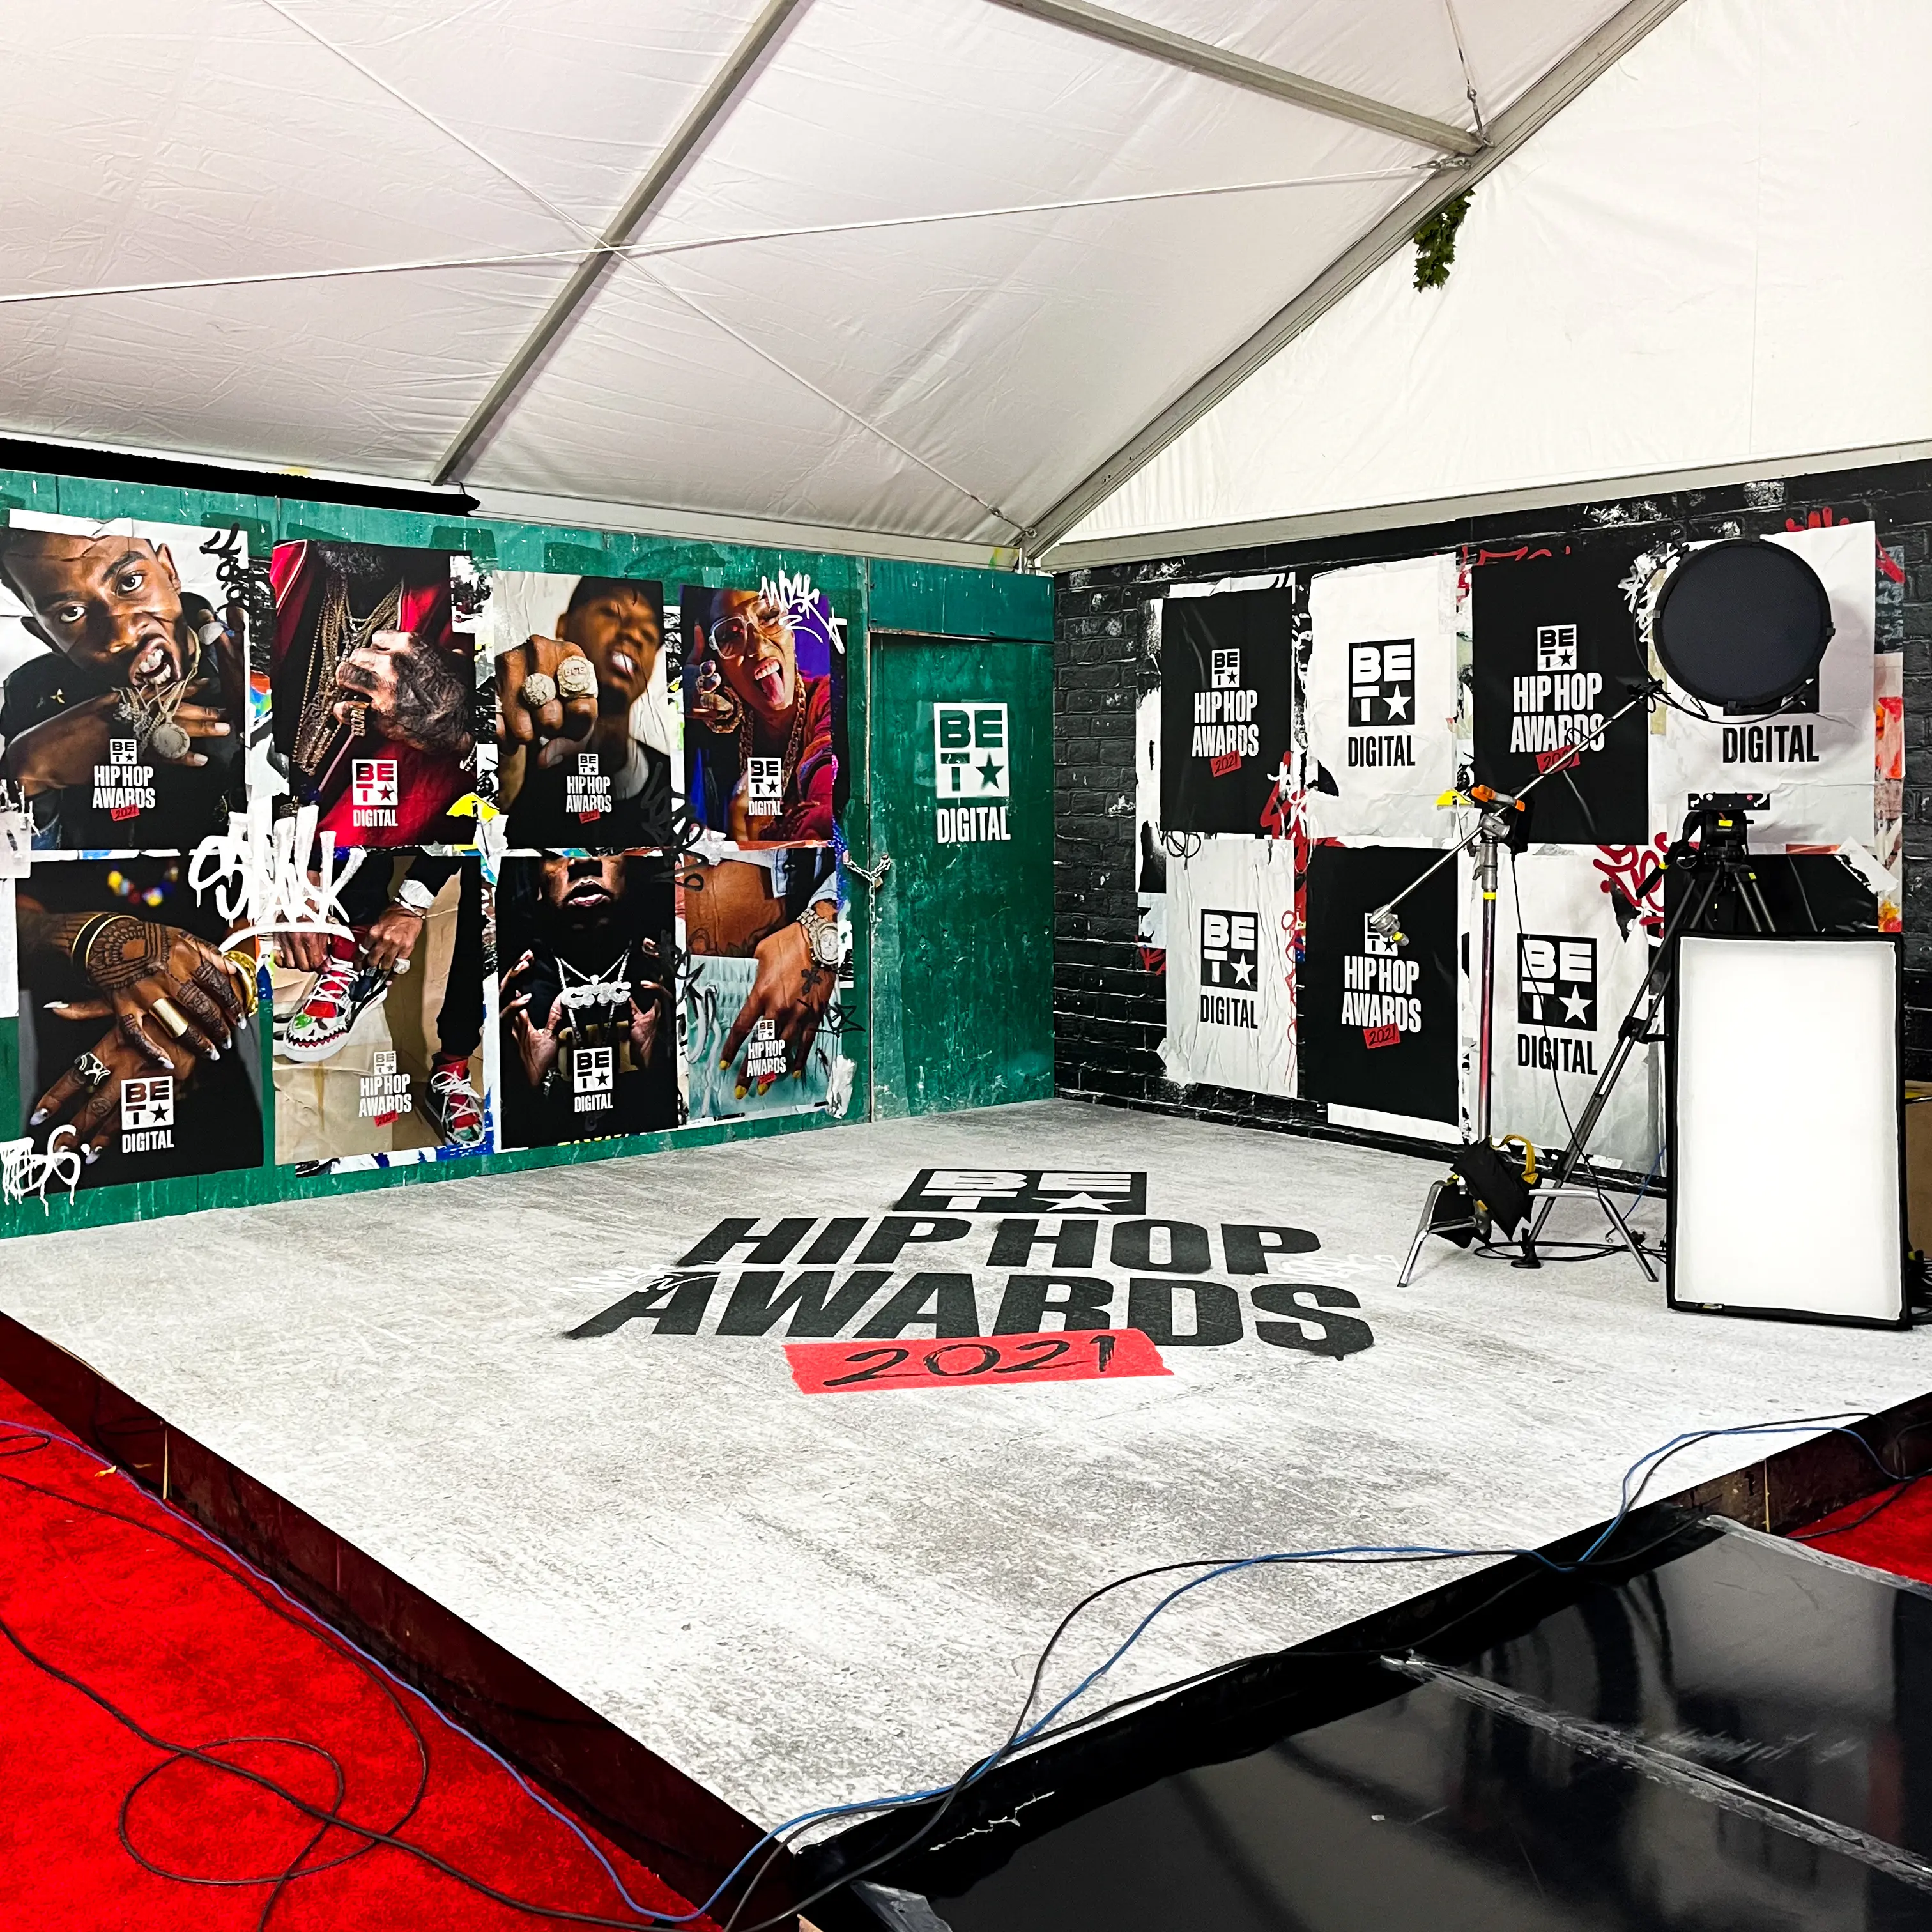 An image of flooring and wall vinyls for the BET Hip Hop Awards 2021.